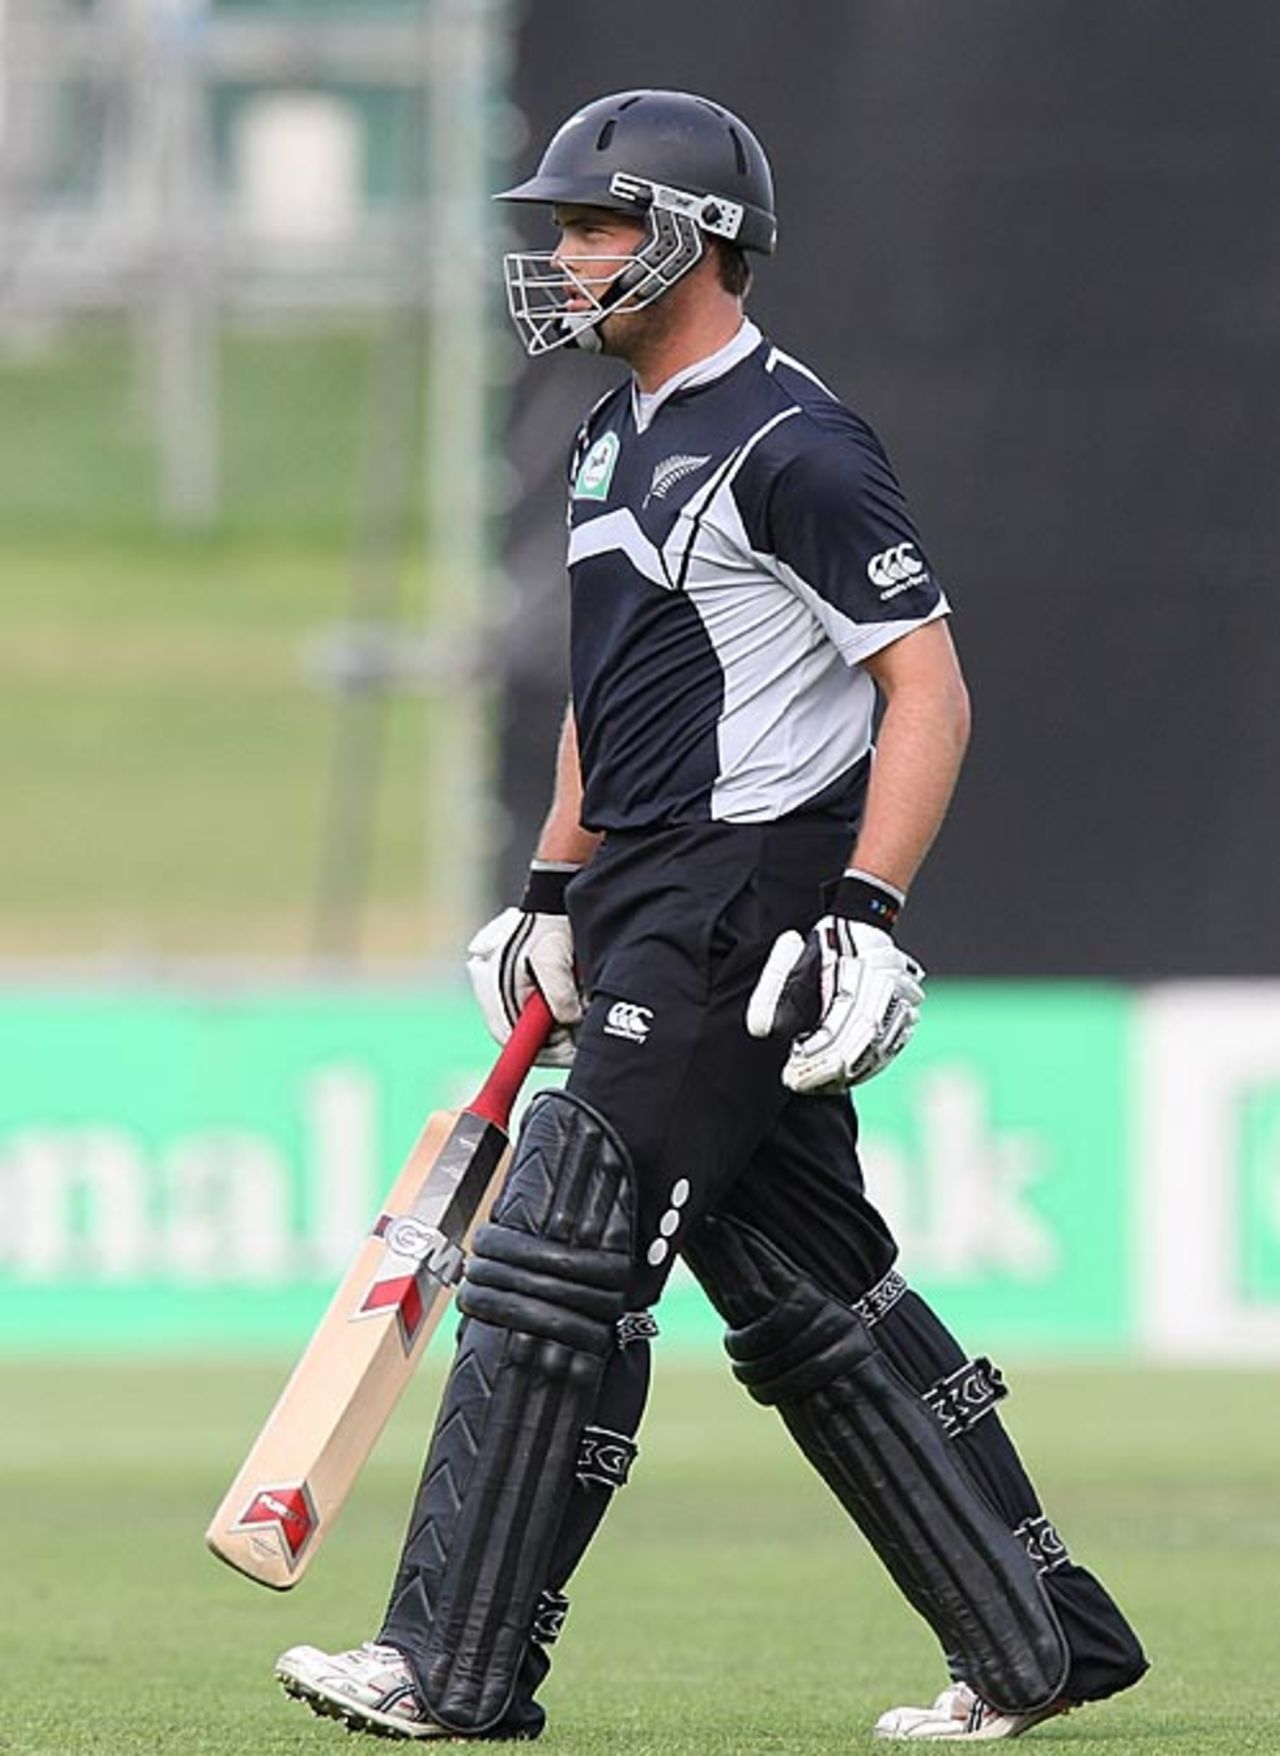 Daniel Flynn walks back disappointed after scoring 21, New Zealand v West Indies, 5th ODI, Napier, January 13, 2009